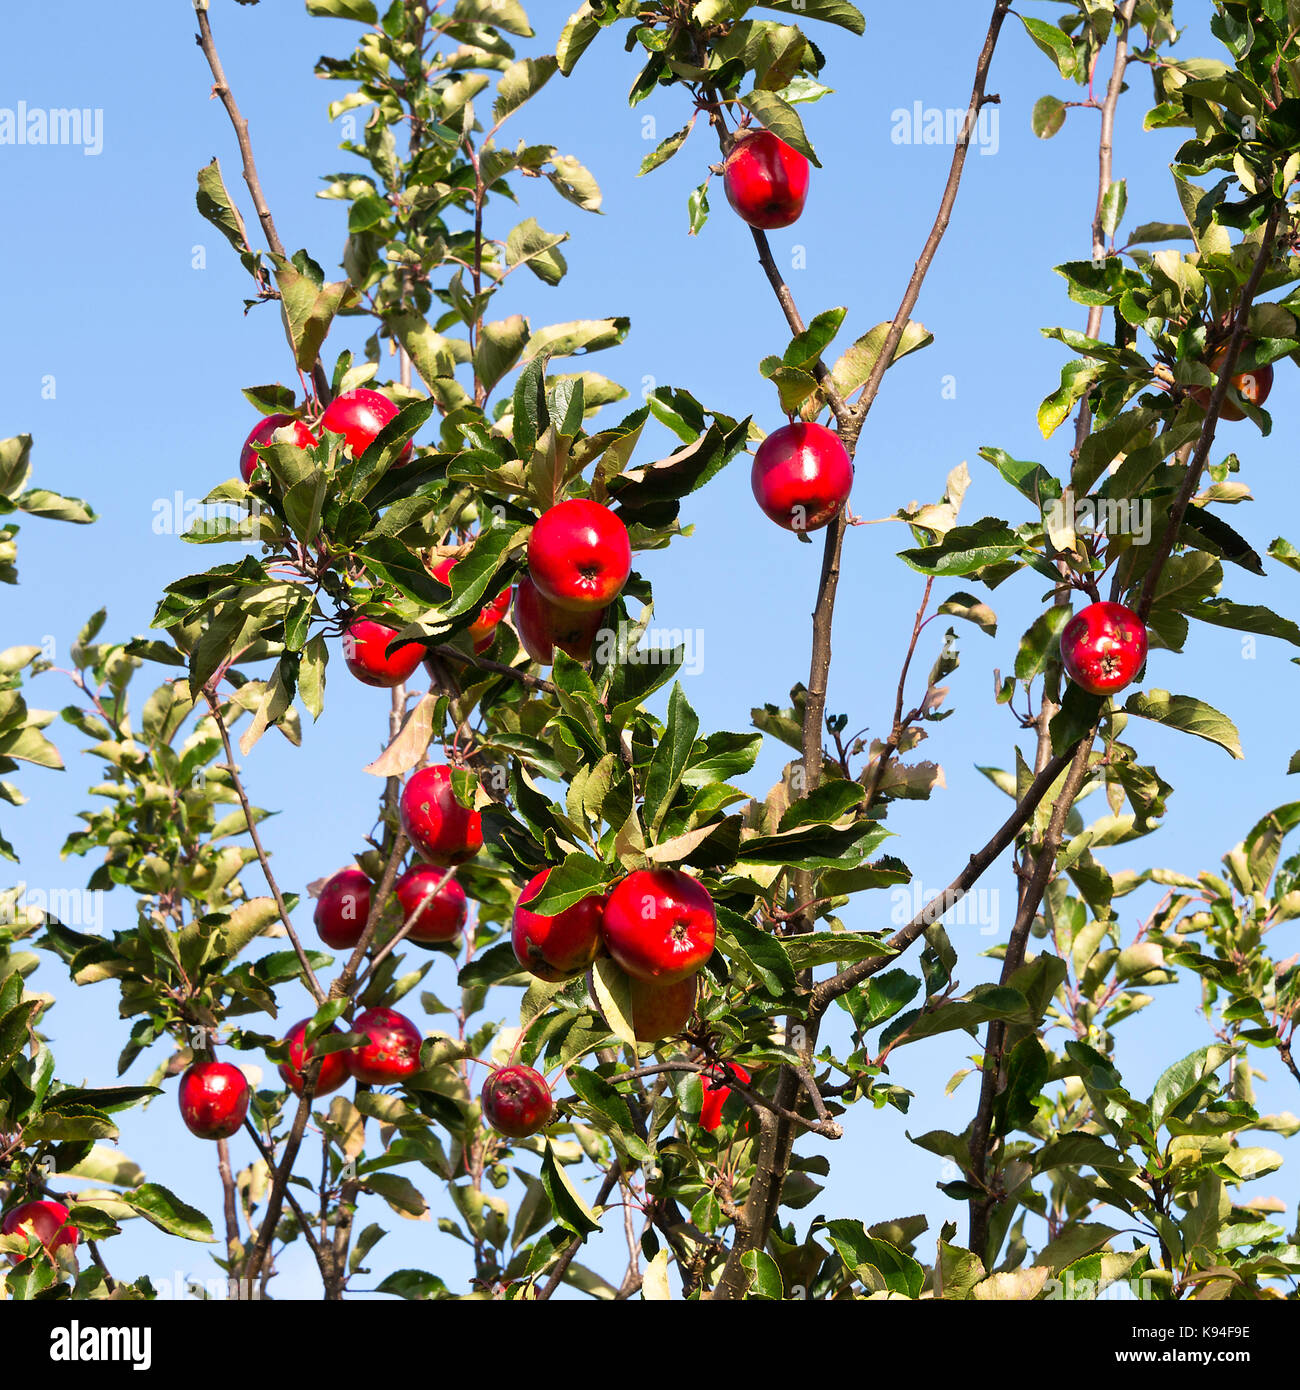 Beautiful Red Eating Apples on a Tree in a Garden in Bainbridge North Yorkshire England United Kingdom UK Stock Photo